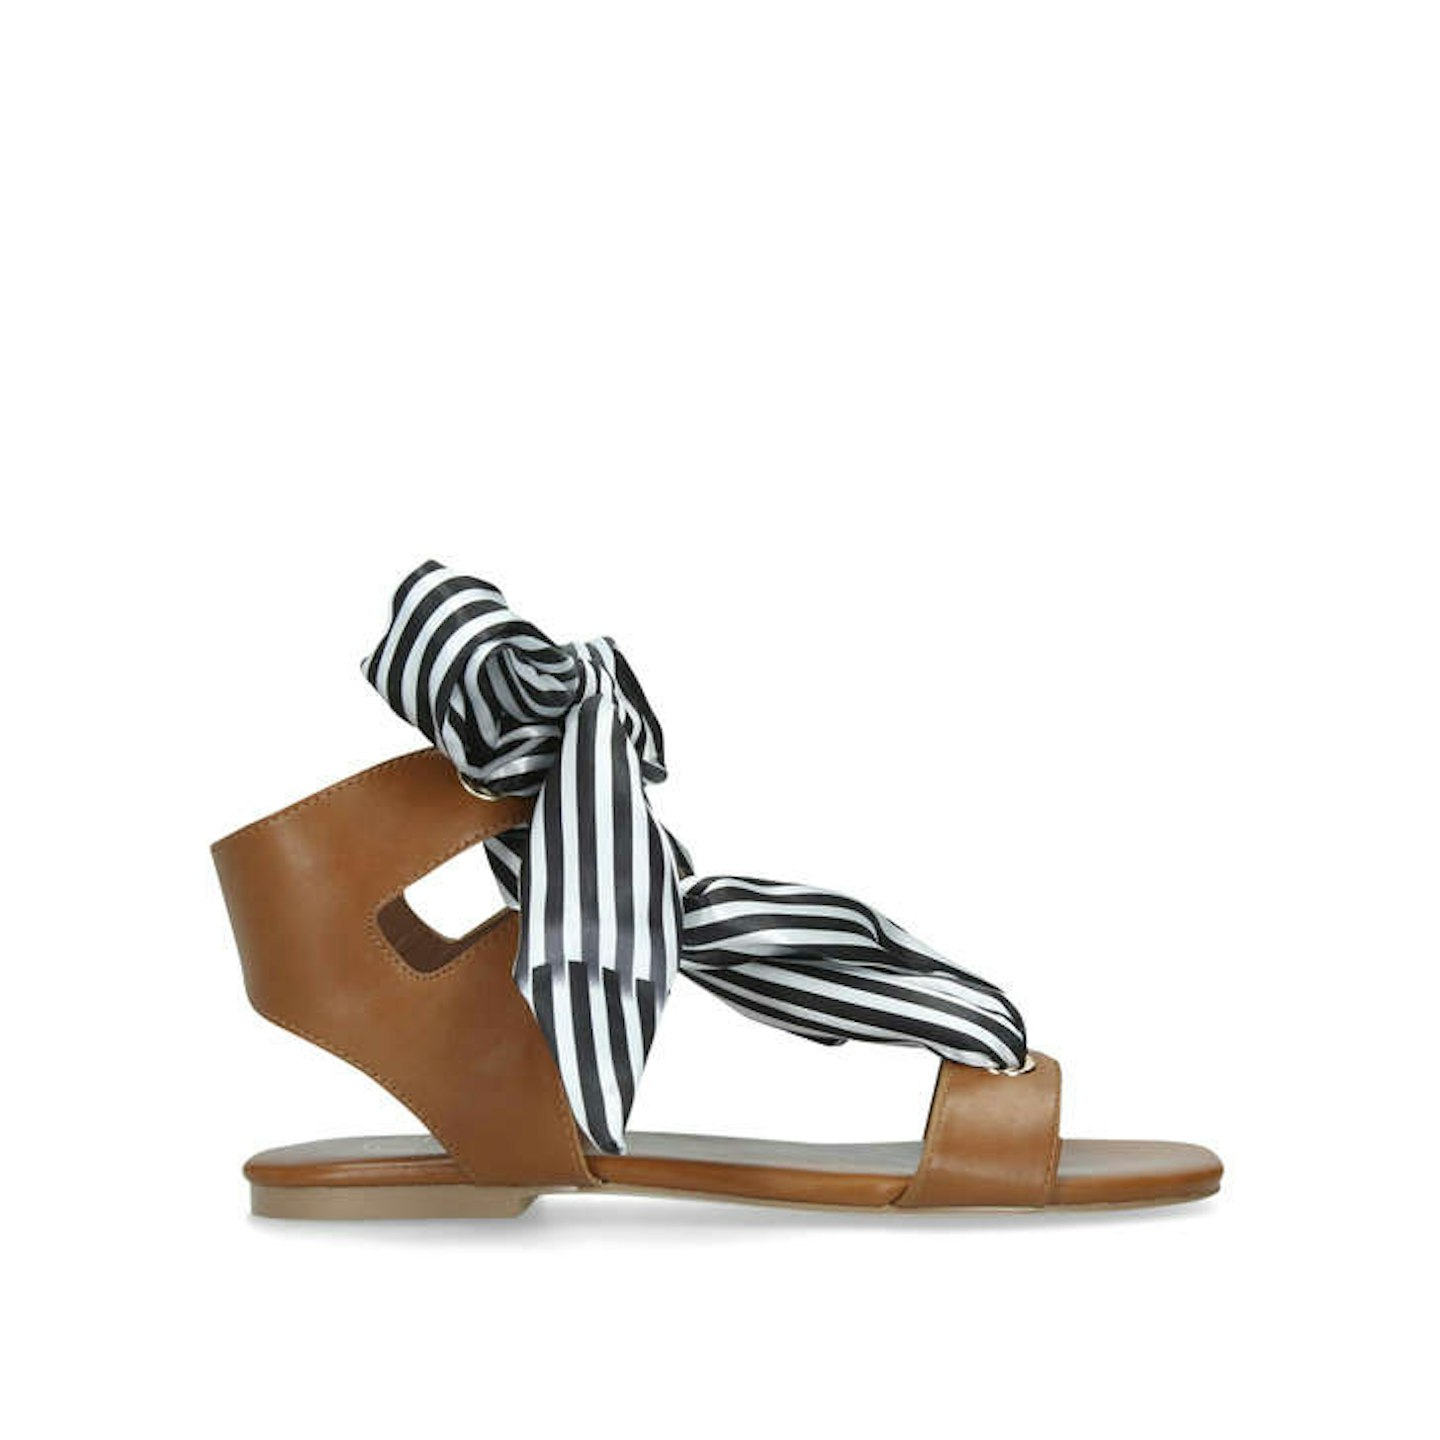 Tan Sandals With Striped Ties, £79